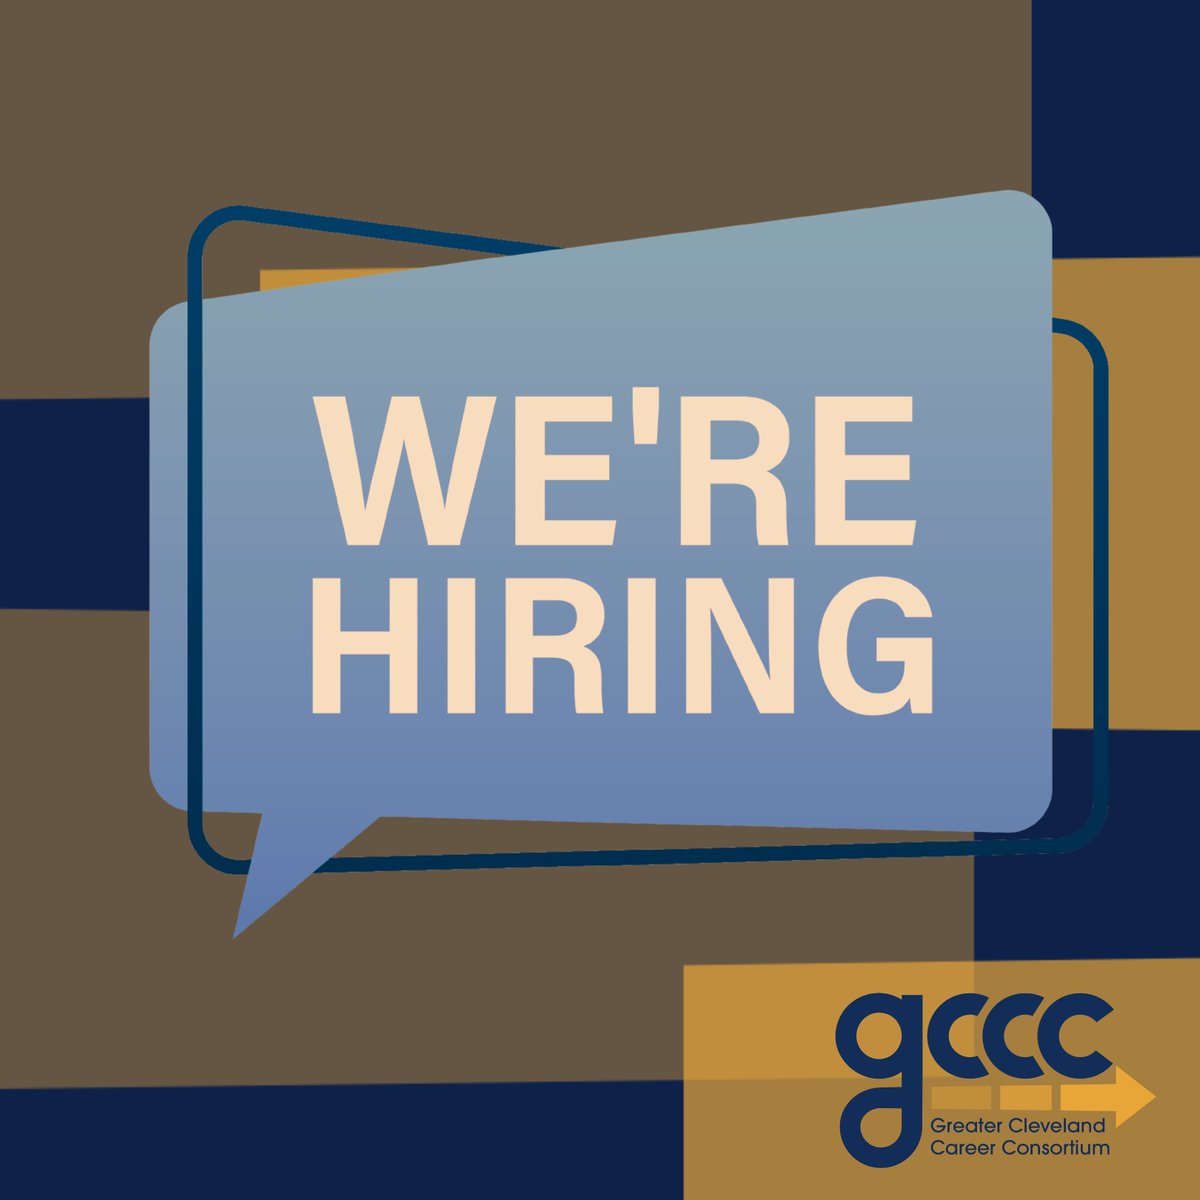 The GCCC is #hiring a Work-Based Learning Coordinator to develop strategies and tactics that position GCCC as an integral partner with the business community by helping organizations meet their ongoing workforce needs. Visit the posting here: recruiting.paylocity.com/recruiting/job…